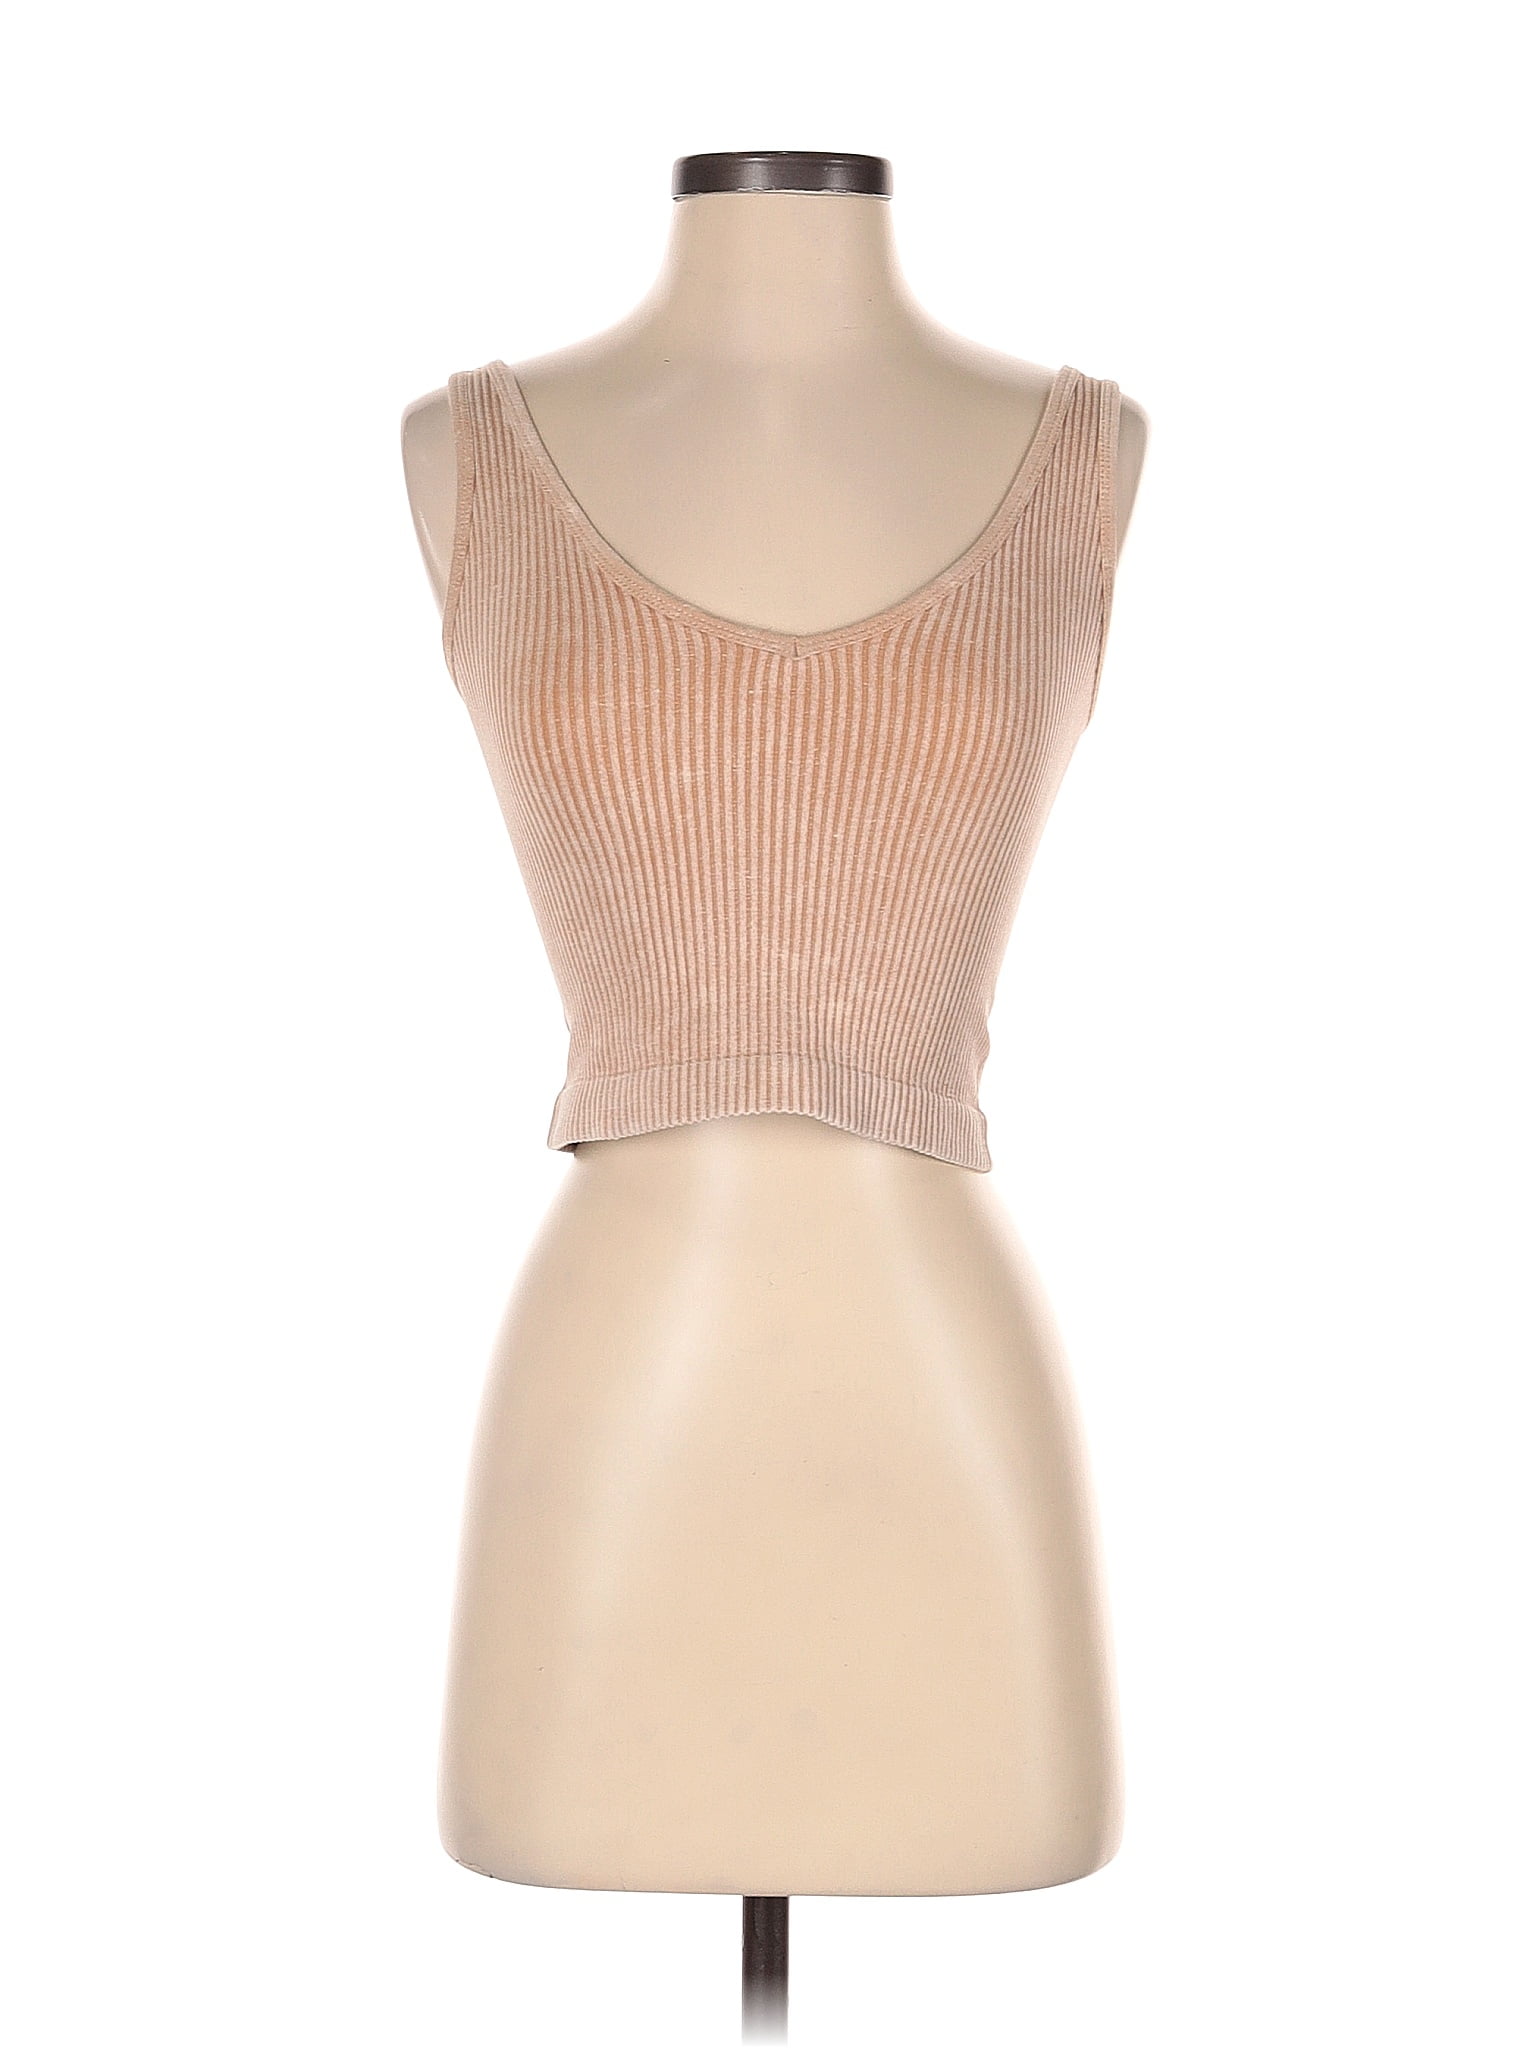 Princess Polly Solid Tan Tube Top Size 8 - 44% off